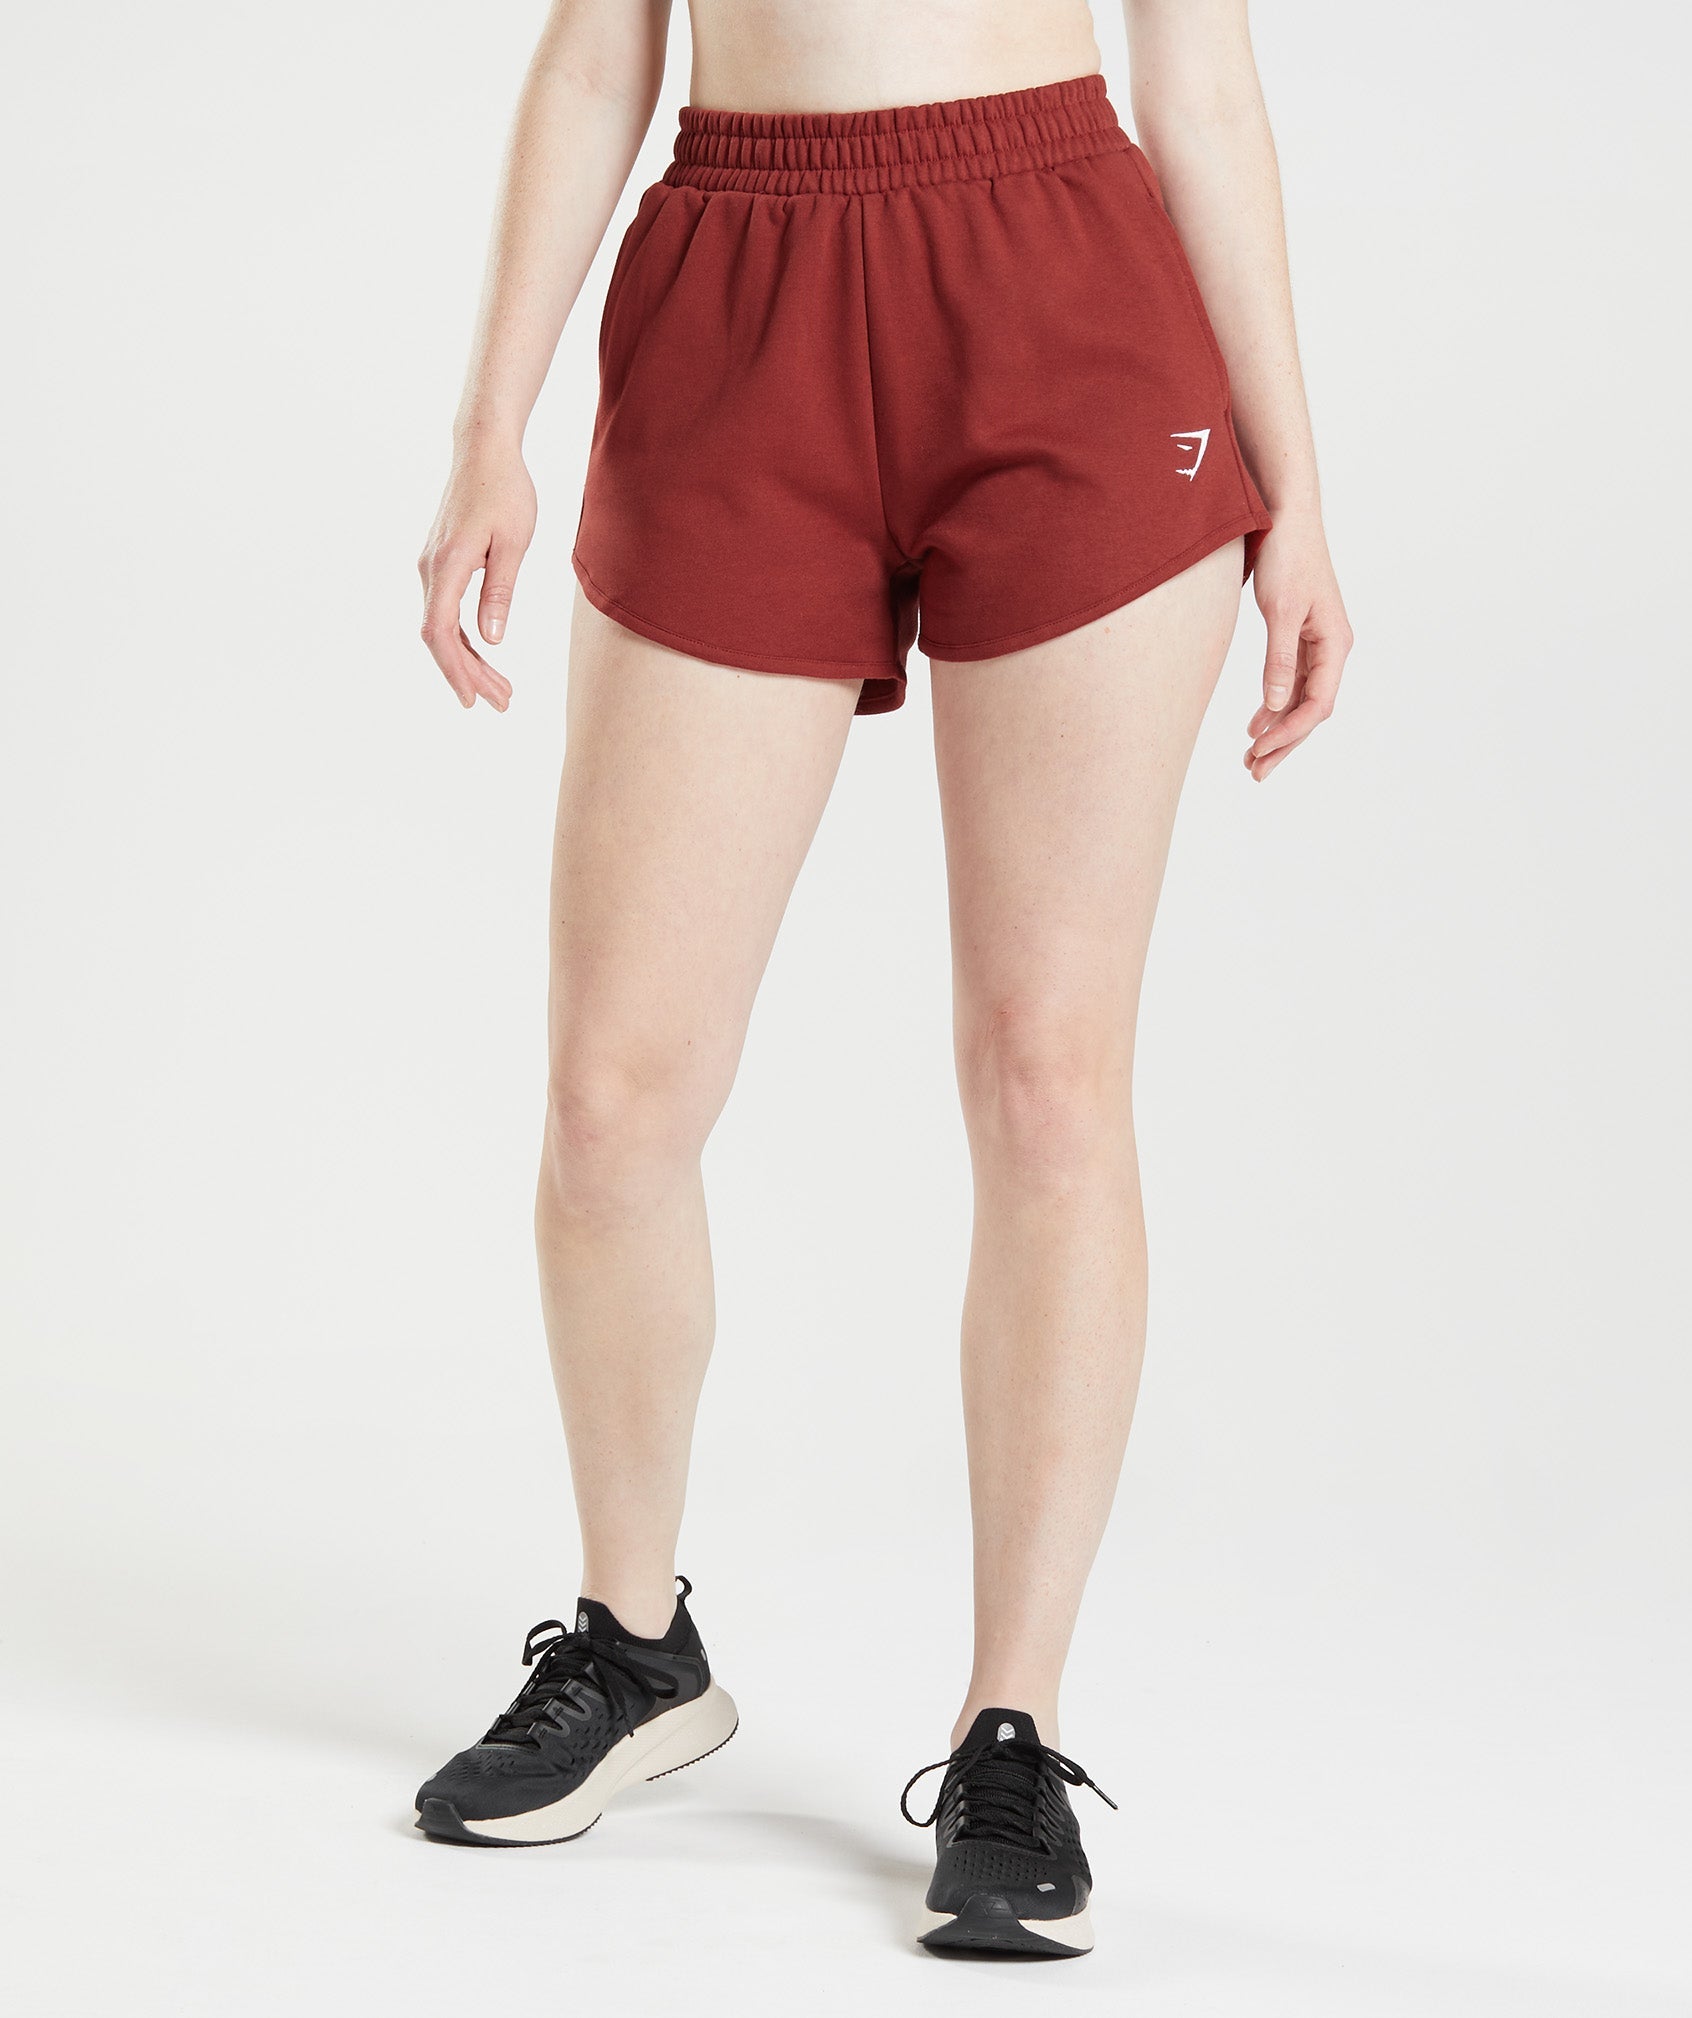 Training Sweat Shorts in Rosewood Red